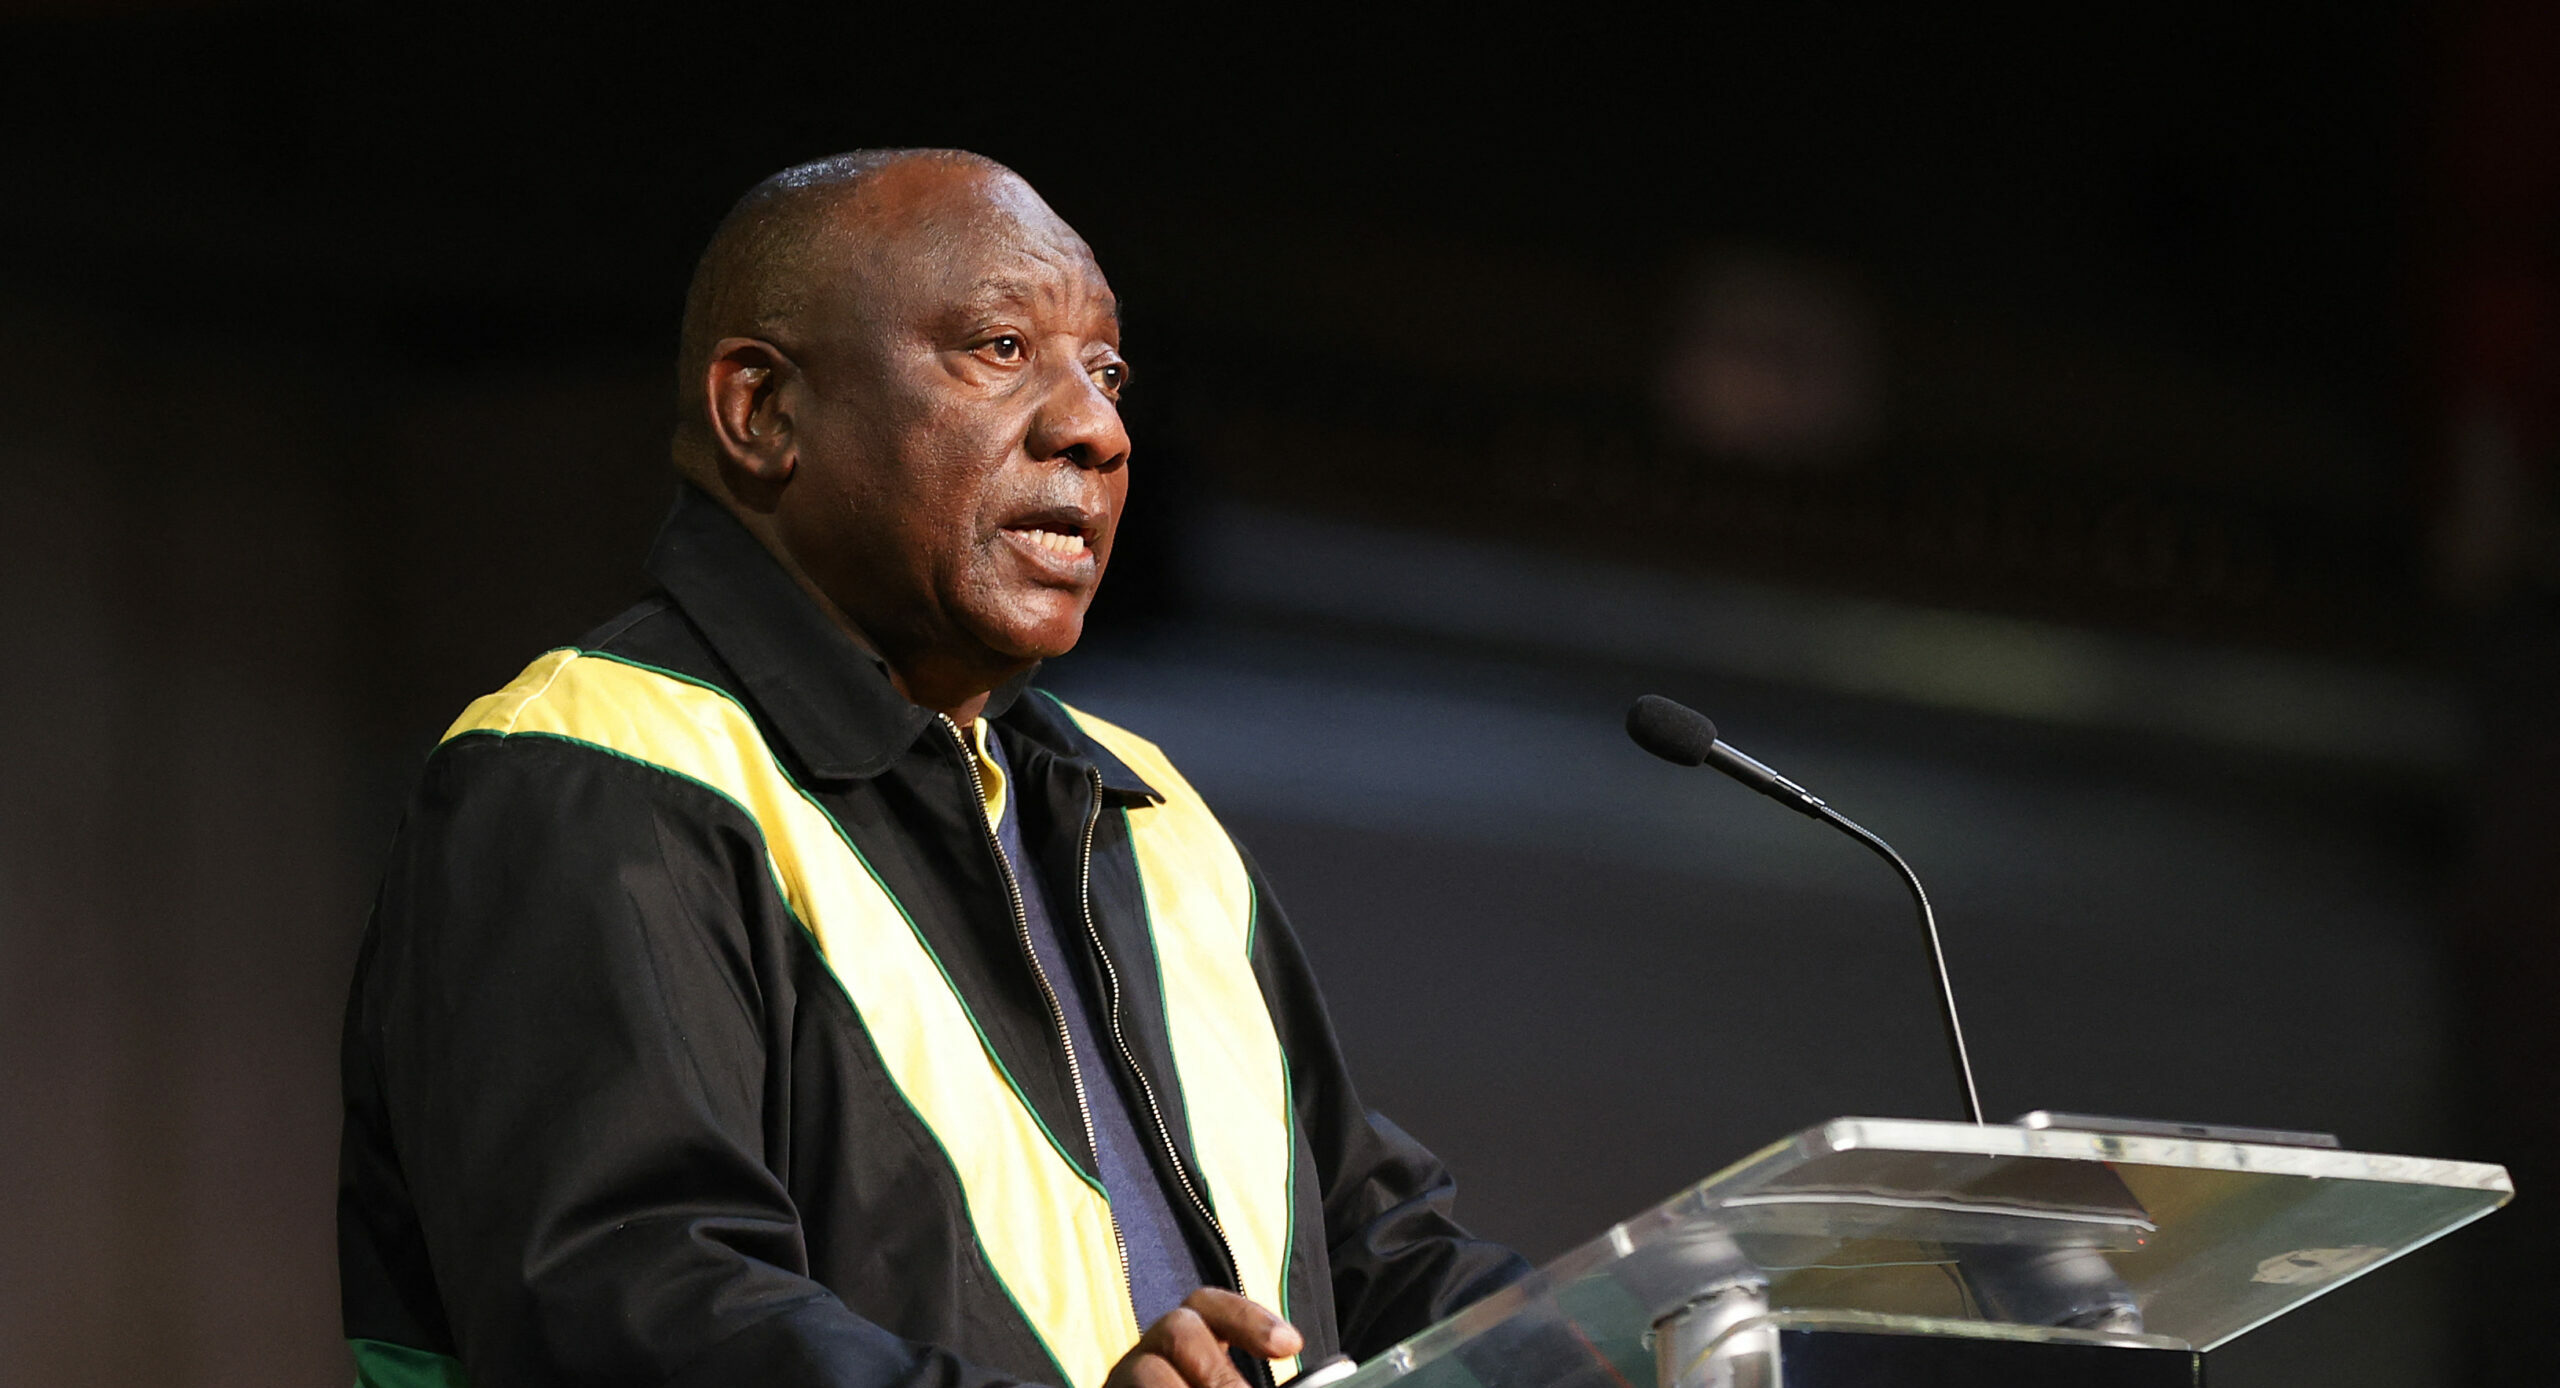 South Africa | ANC factionalism intensifies ahead of December vote